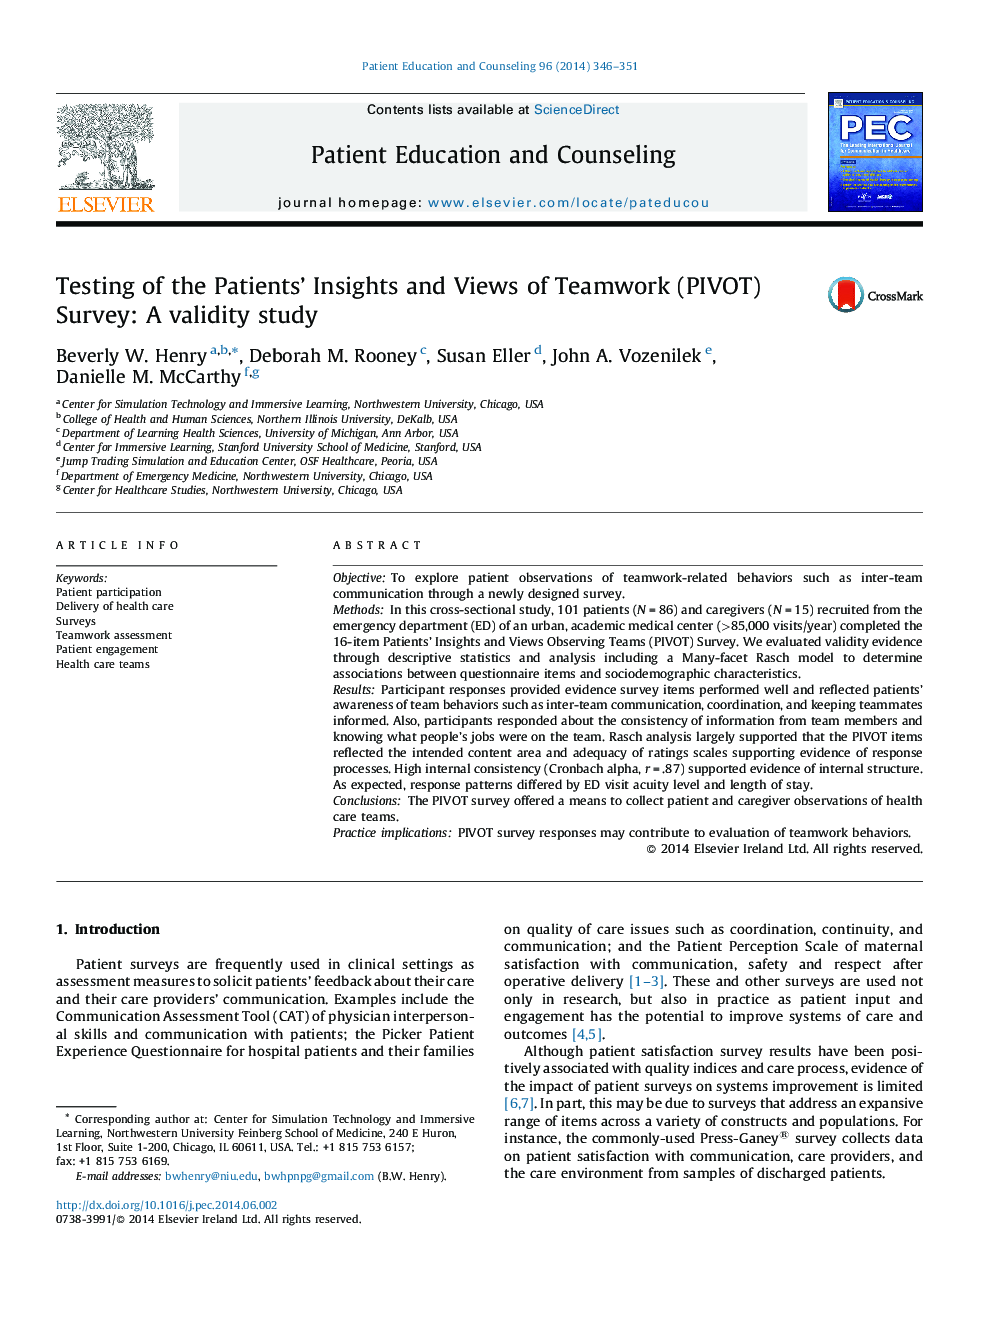 Testing of the Patients' Insights and Views of Teamwork (PIVOT) Survey: A validity study